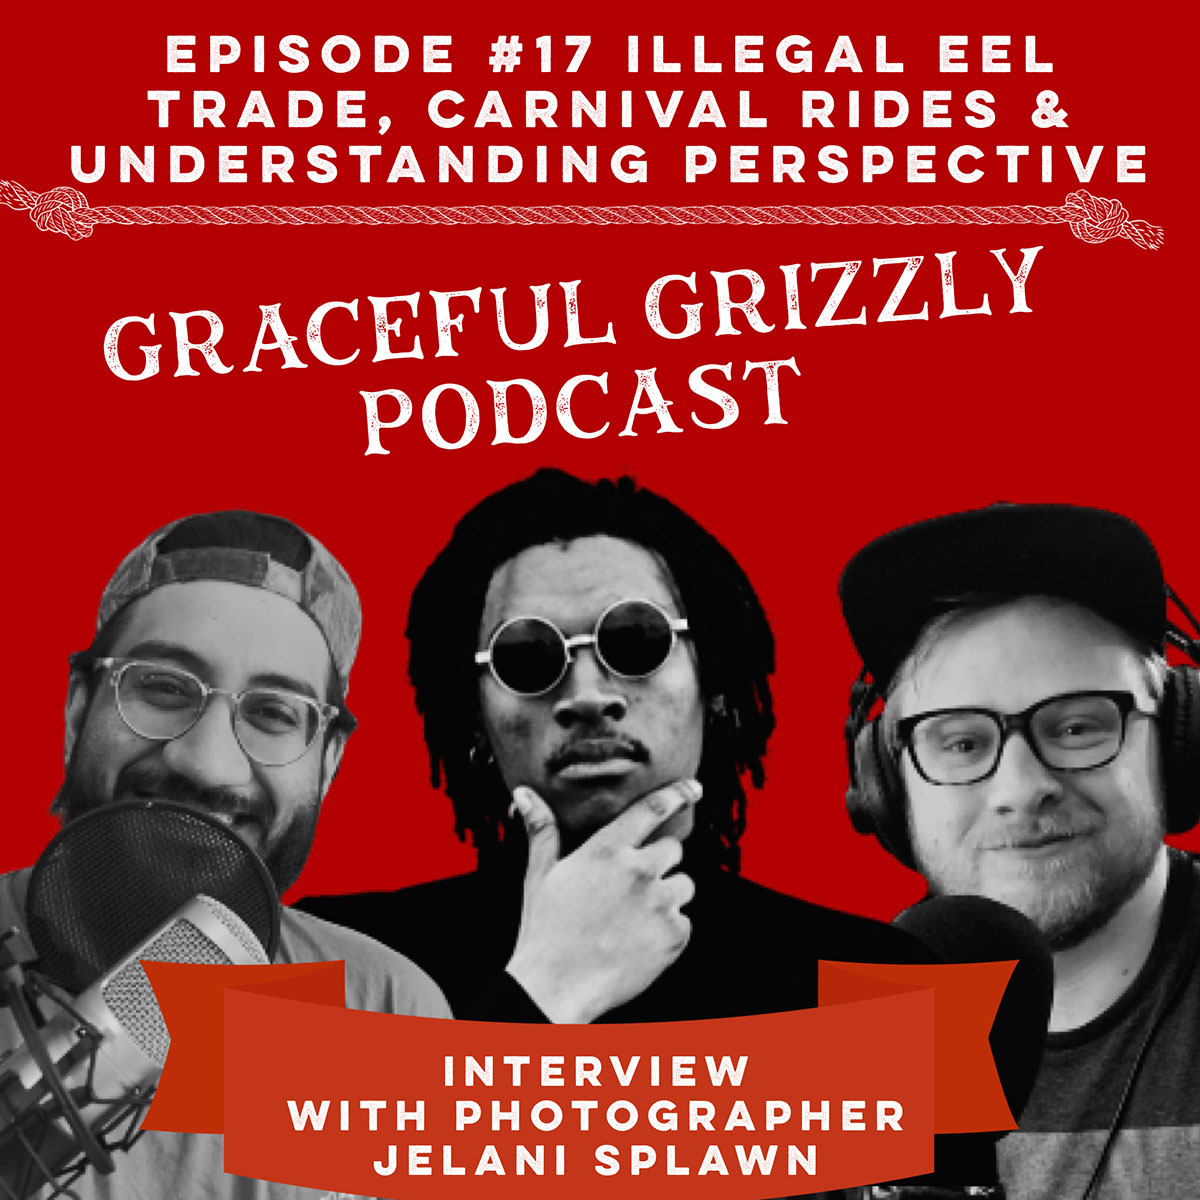 Episode 17 - Graceful Grizzly Podcast